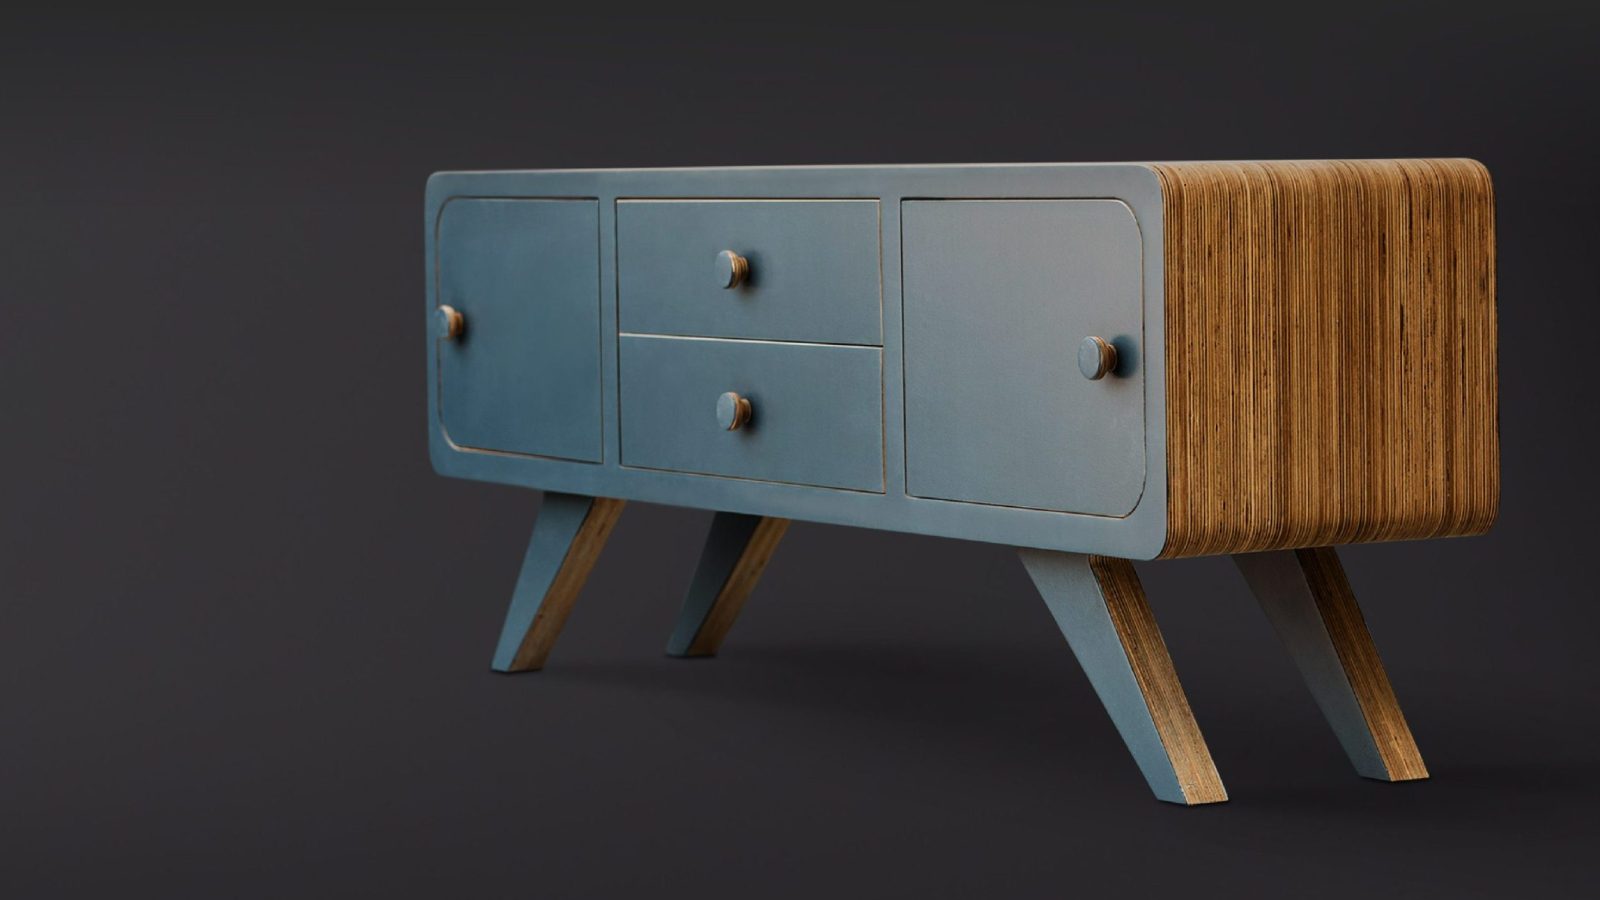 A modern sideboard with a wooden finish and three blue drawers, set against a dark gray background. Designed by Design Agency Bristol, the furniture features a minimalist design with angled legs.